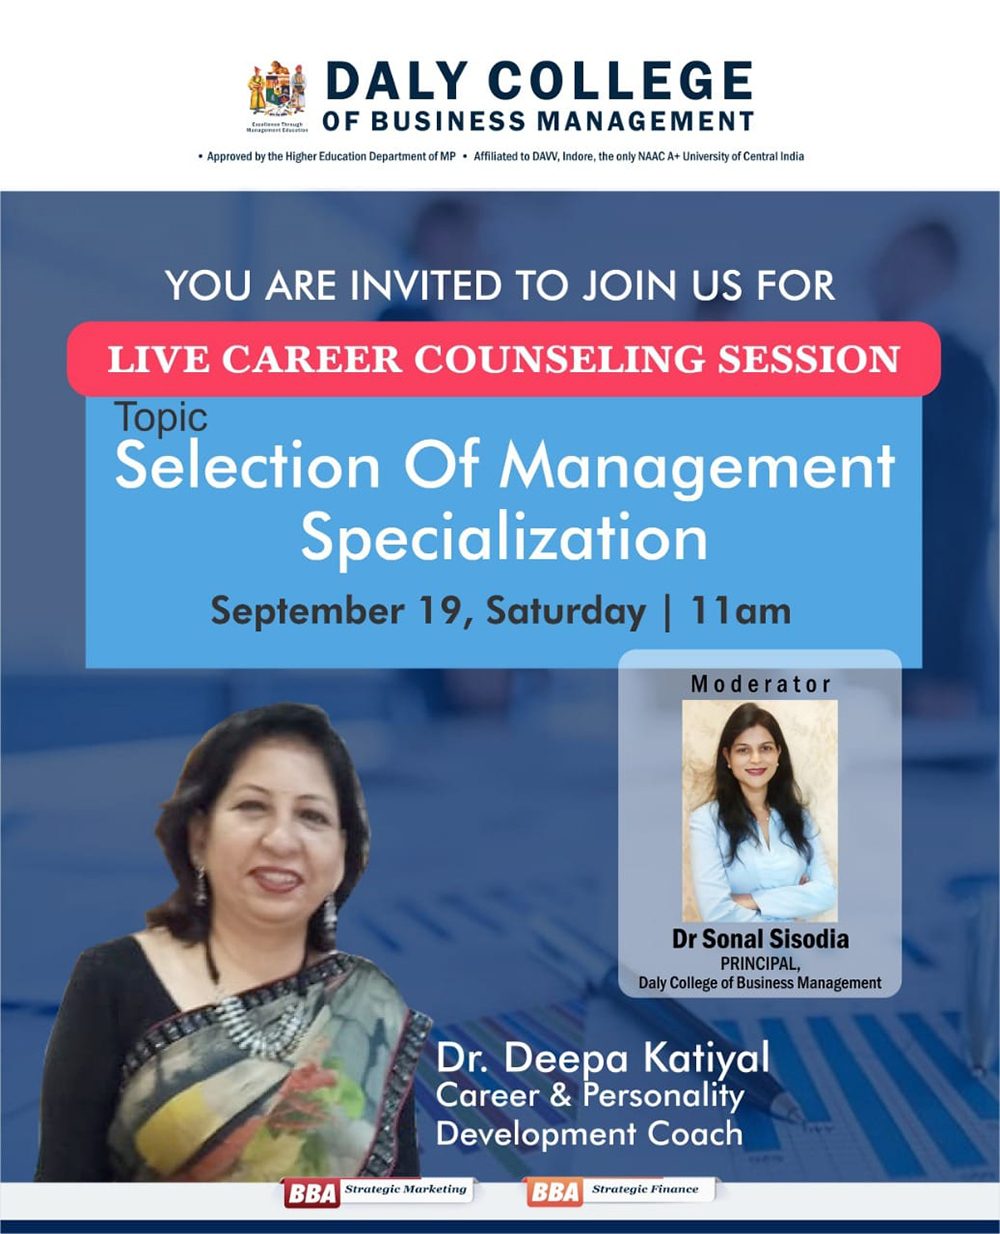 Career Counselling Session by Dr Deepa Katiyal